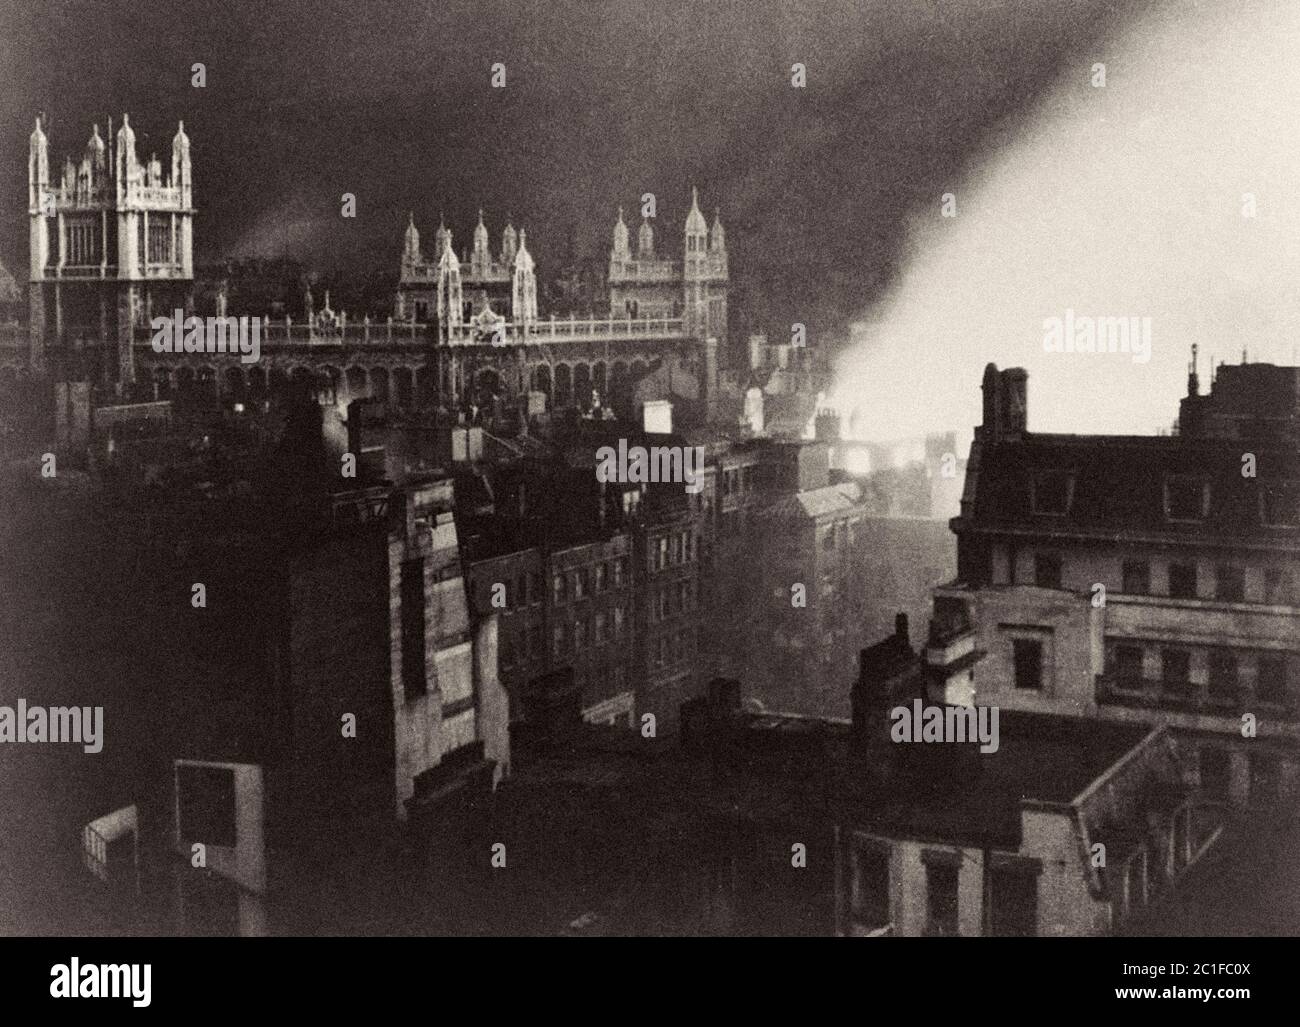 The Record Office in London in flames after a German air raid in 1940. Stock Photo